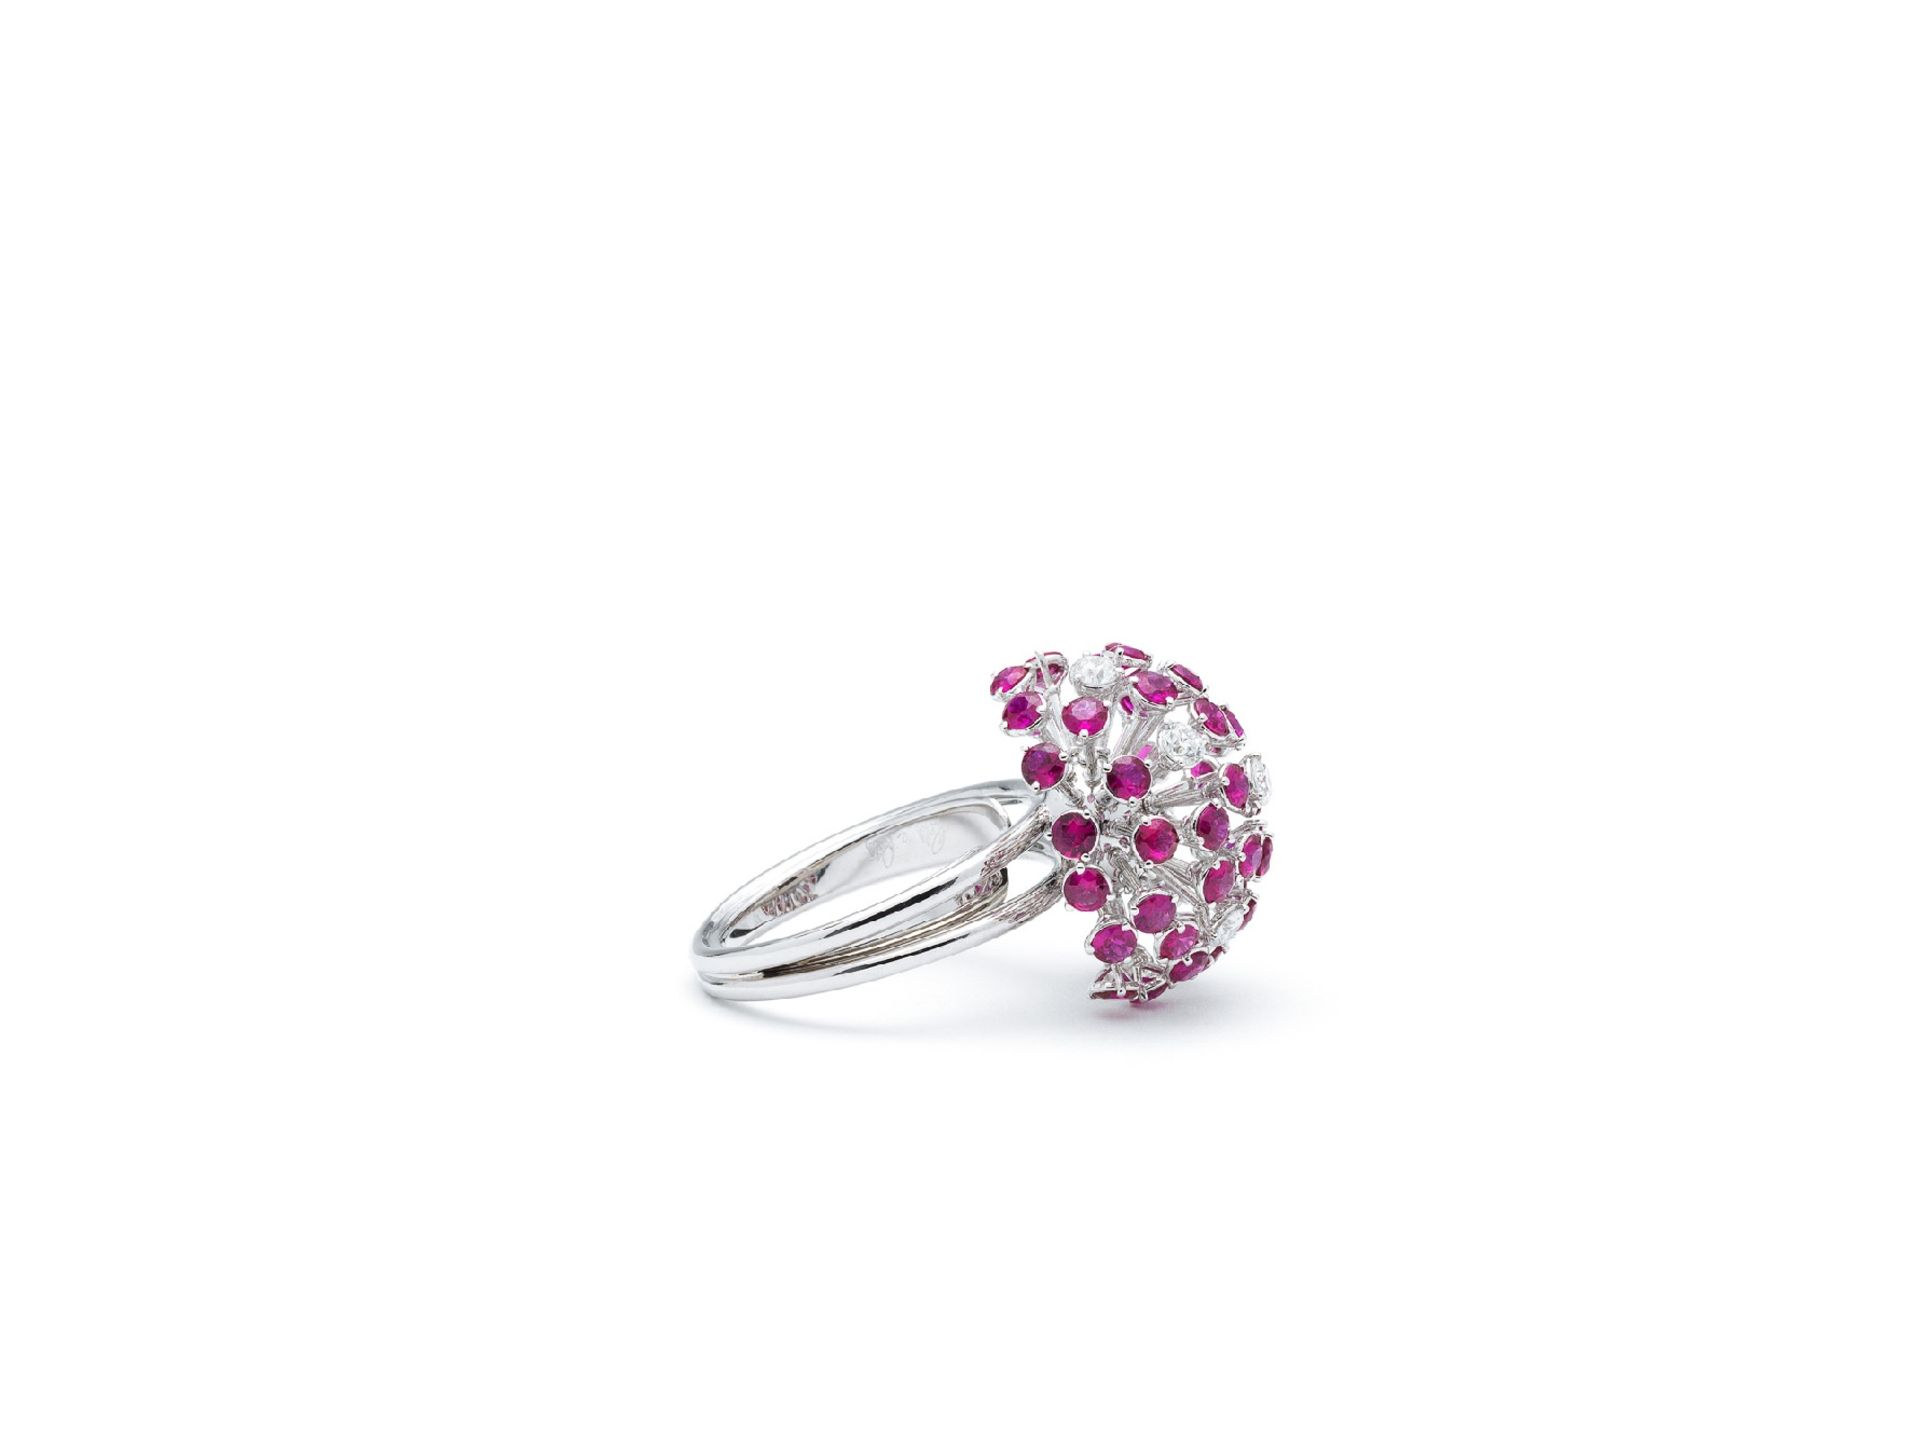 Ring with brilliant diamonds and rubies - Image 4 of 5